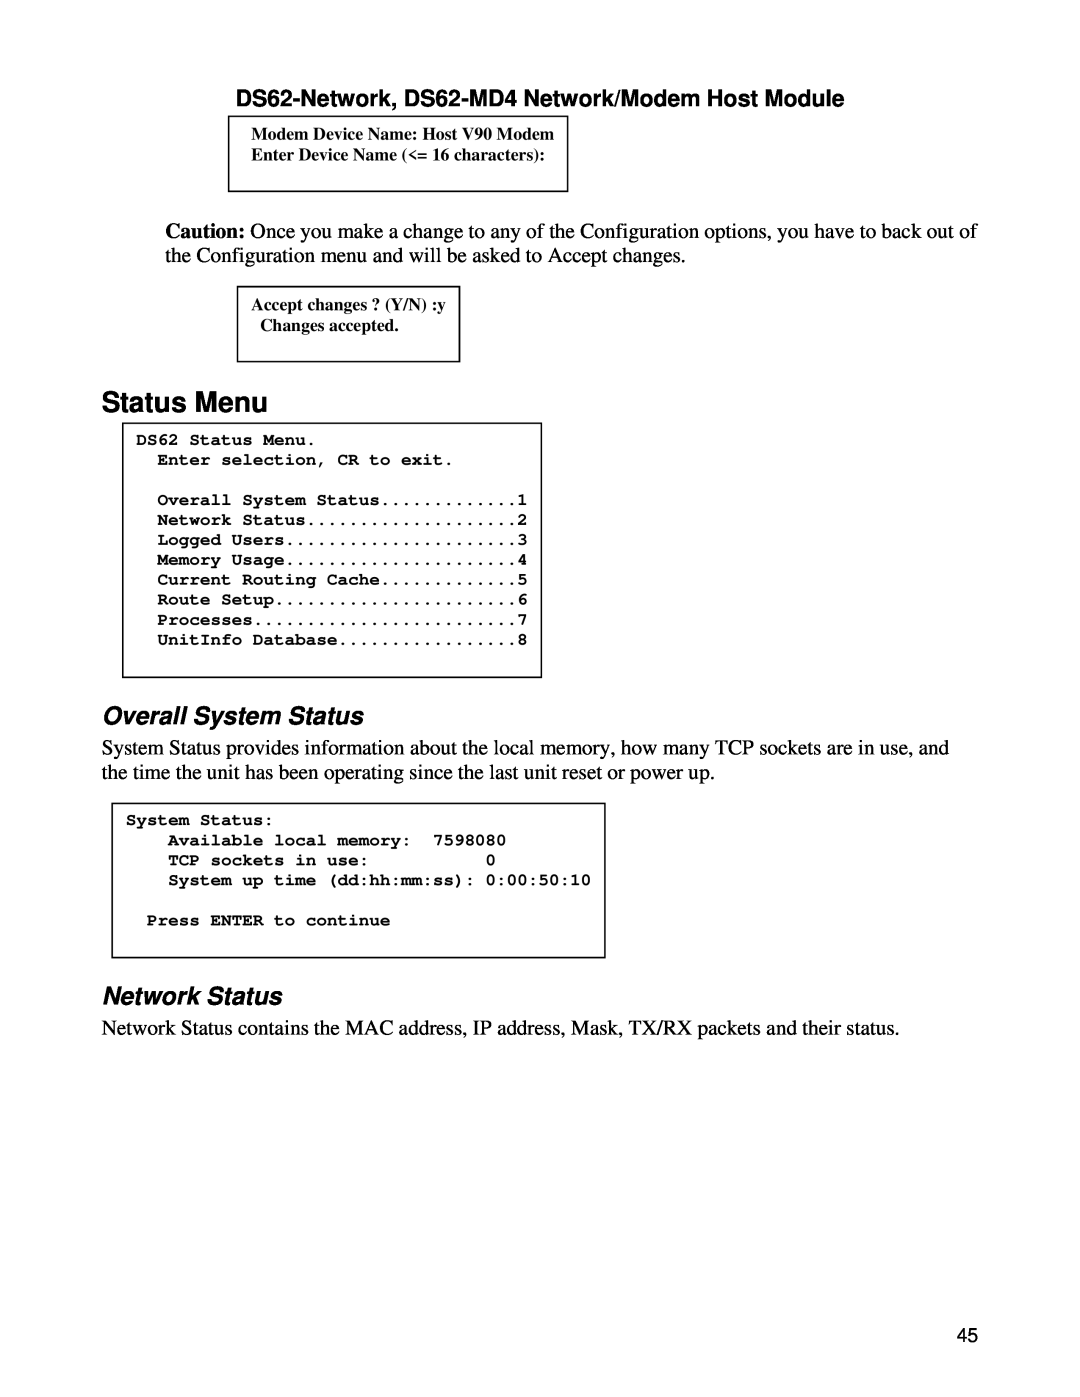 Bay Technical Associates DS62-MD4, DS Series manual Status Menu, Overall System Status, Network Status 